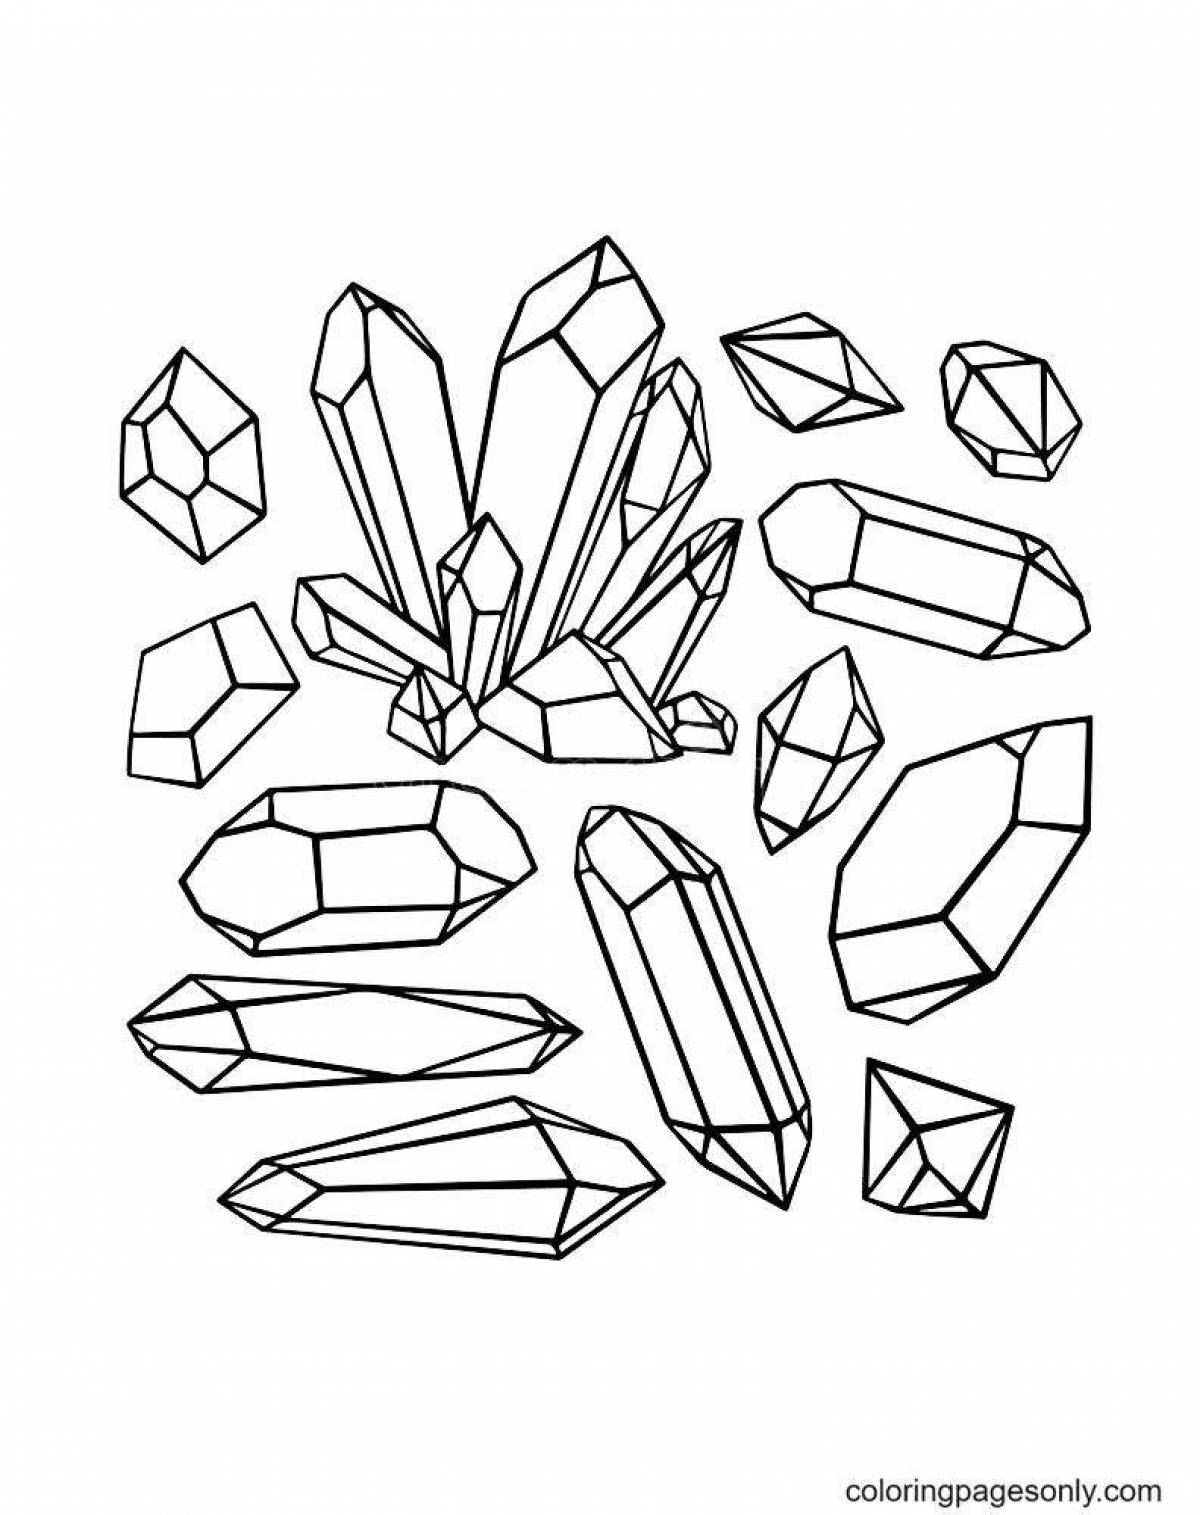 Coloring book dazzling crystals for kids